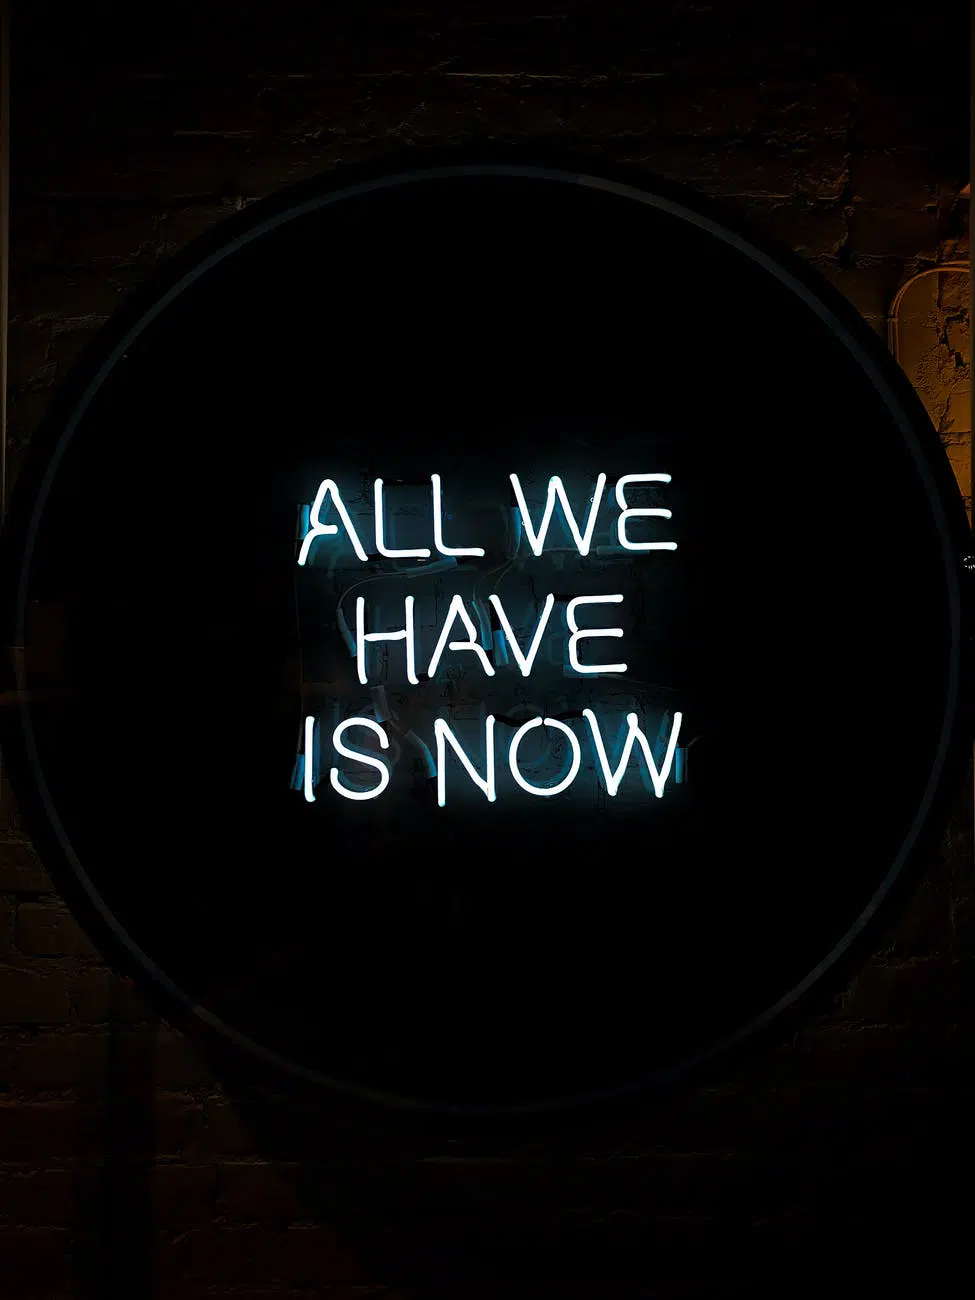 all we have is now neon signage on black surface